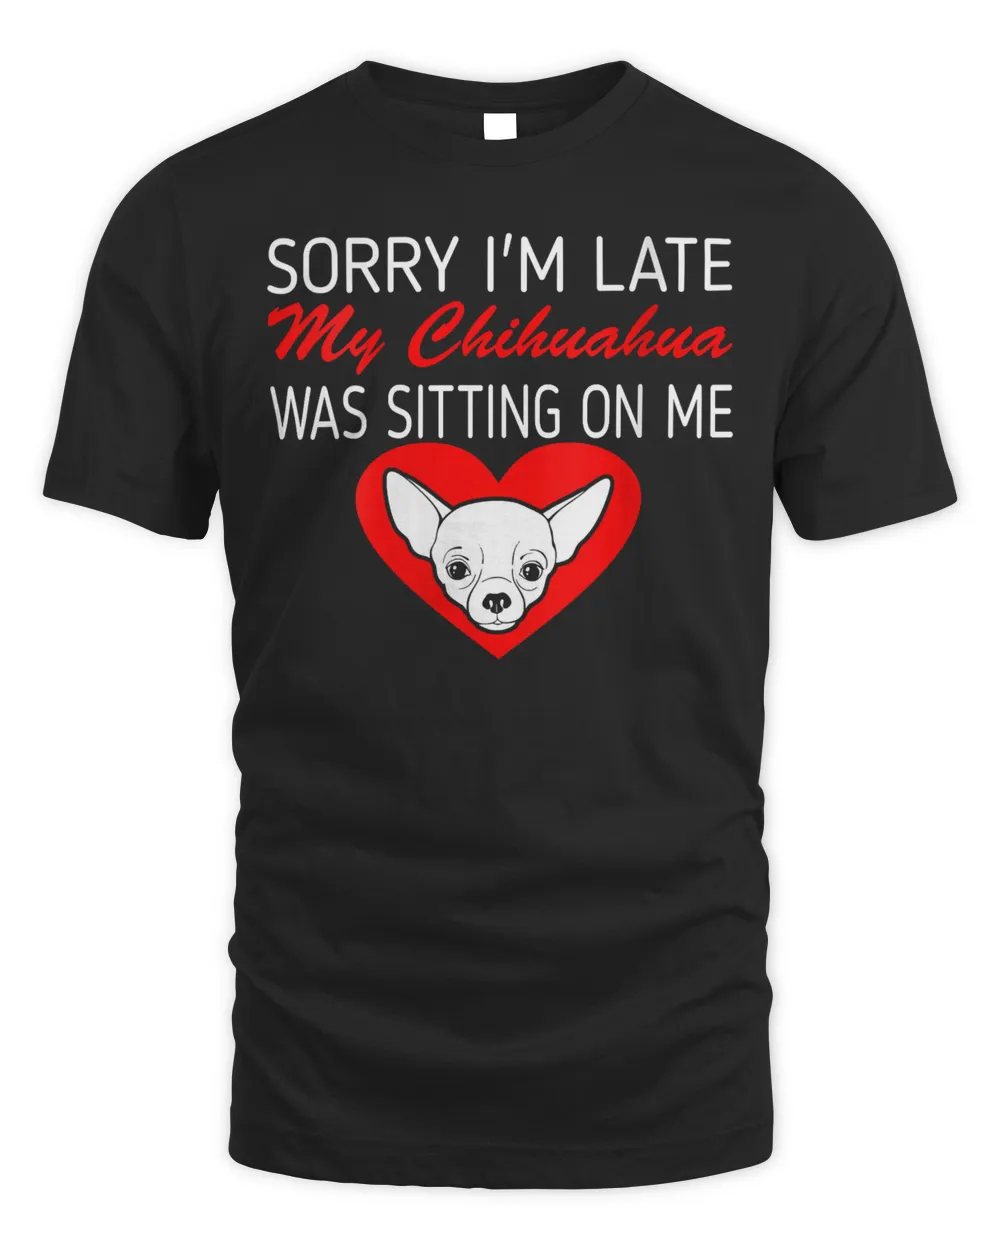 Womens Sorry Late Chihuahua Sitting On Me Gift V-Neck T-Shirt